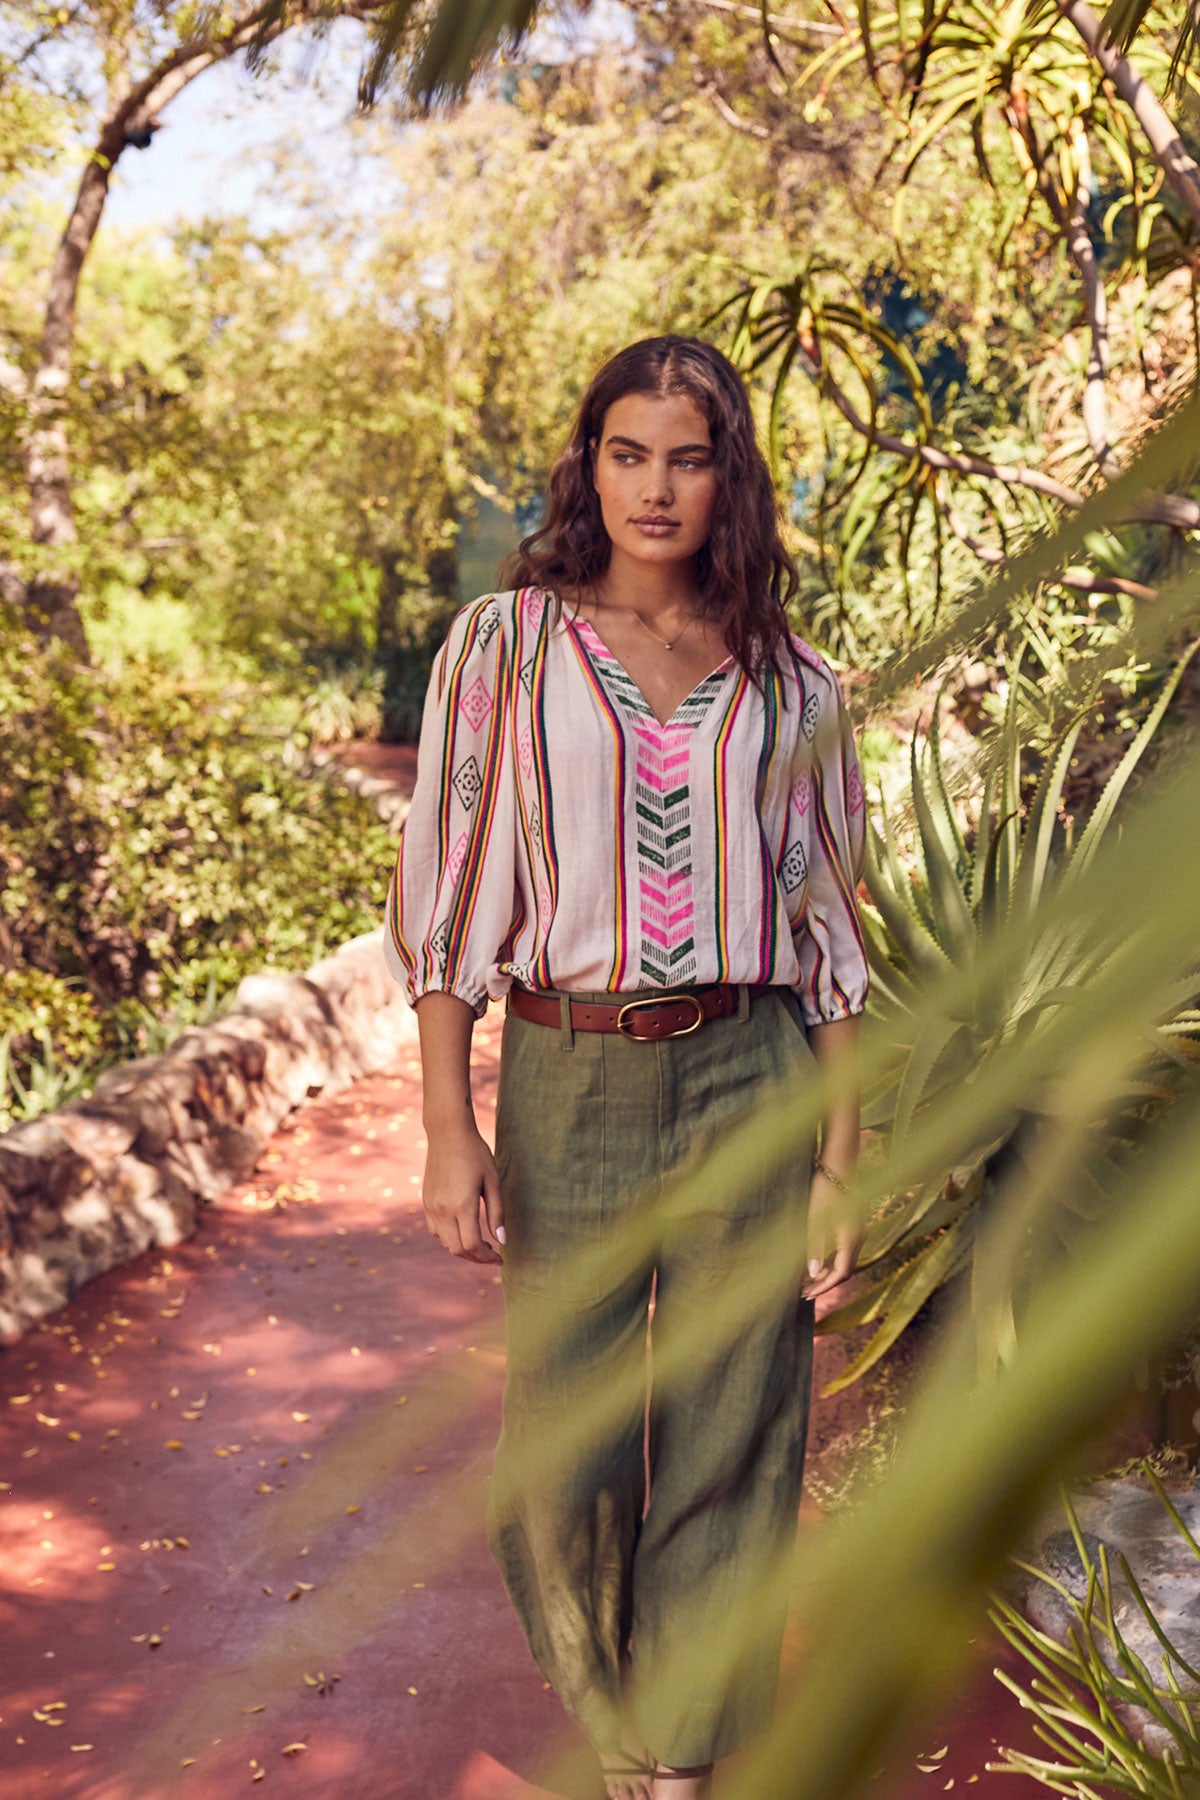 Woman walking down garden path wearing Beth Boho Top in multi colored jacquard print tucked into Dru pant in basil green with brown belt and necklace -26305162969281